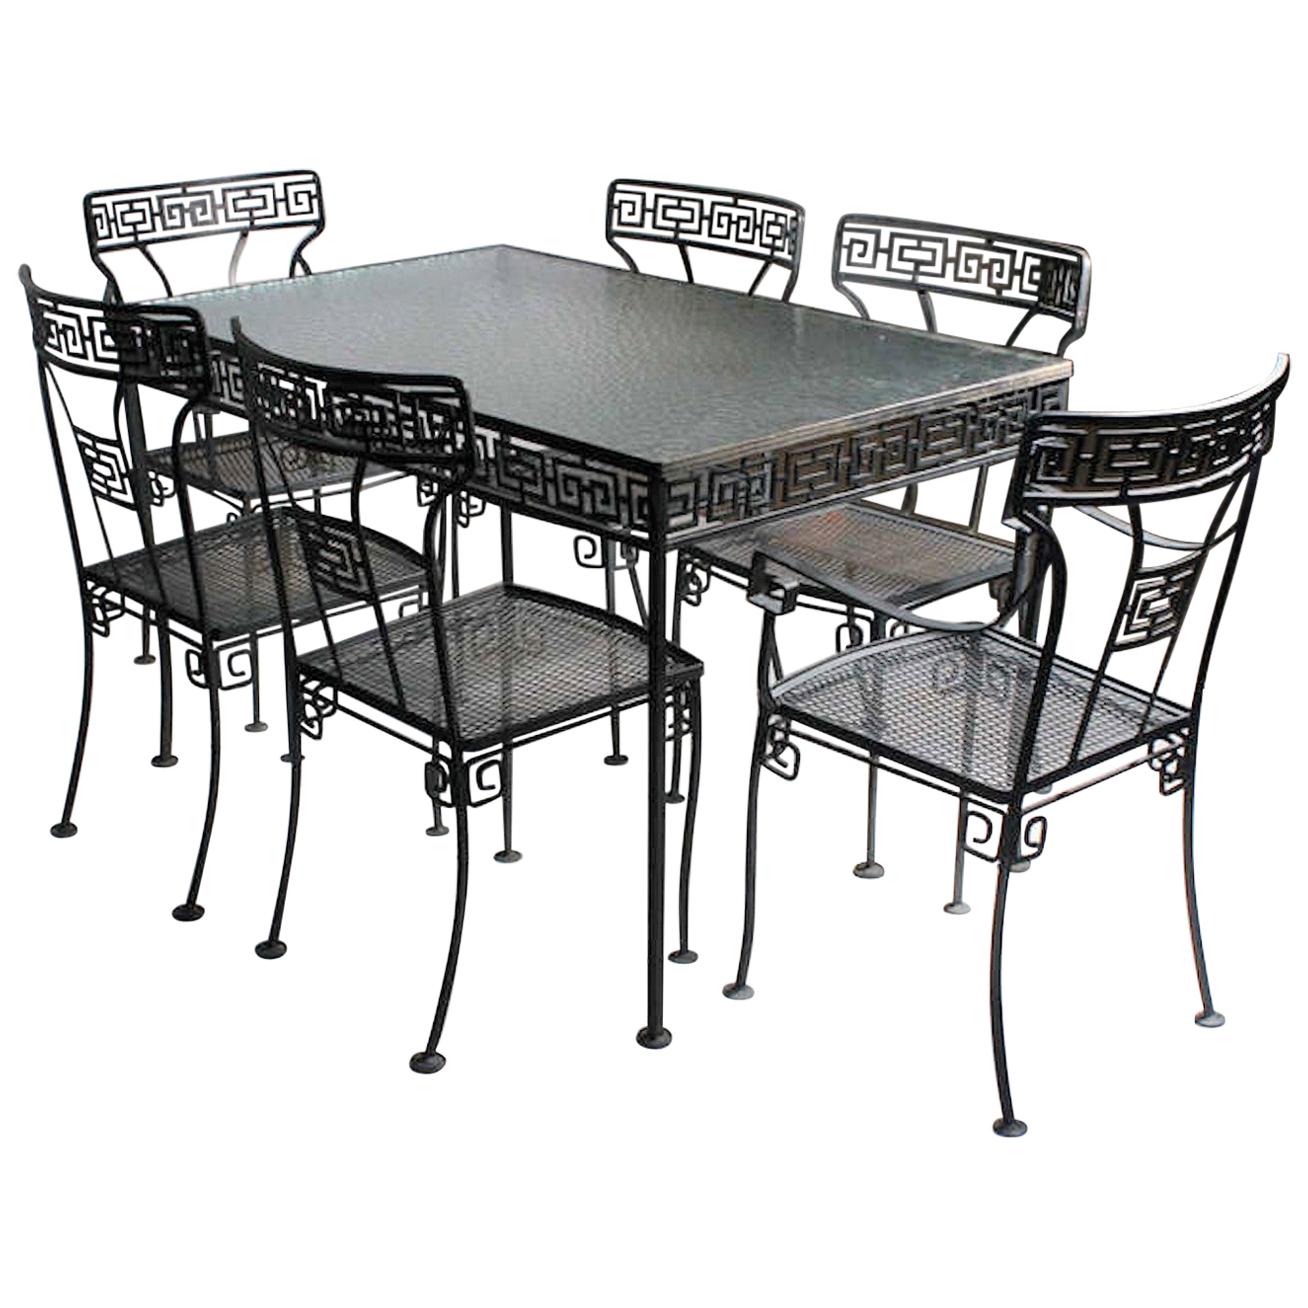 Midcentury Greek Key Patio Wrought Iron Glass Top Dining Set for 6